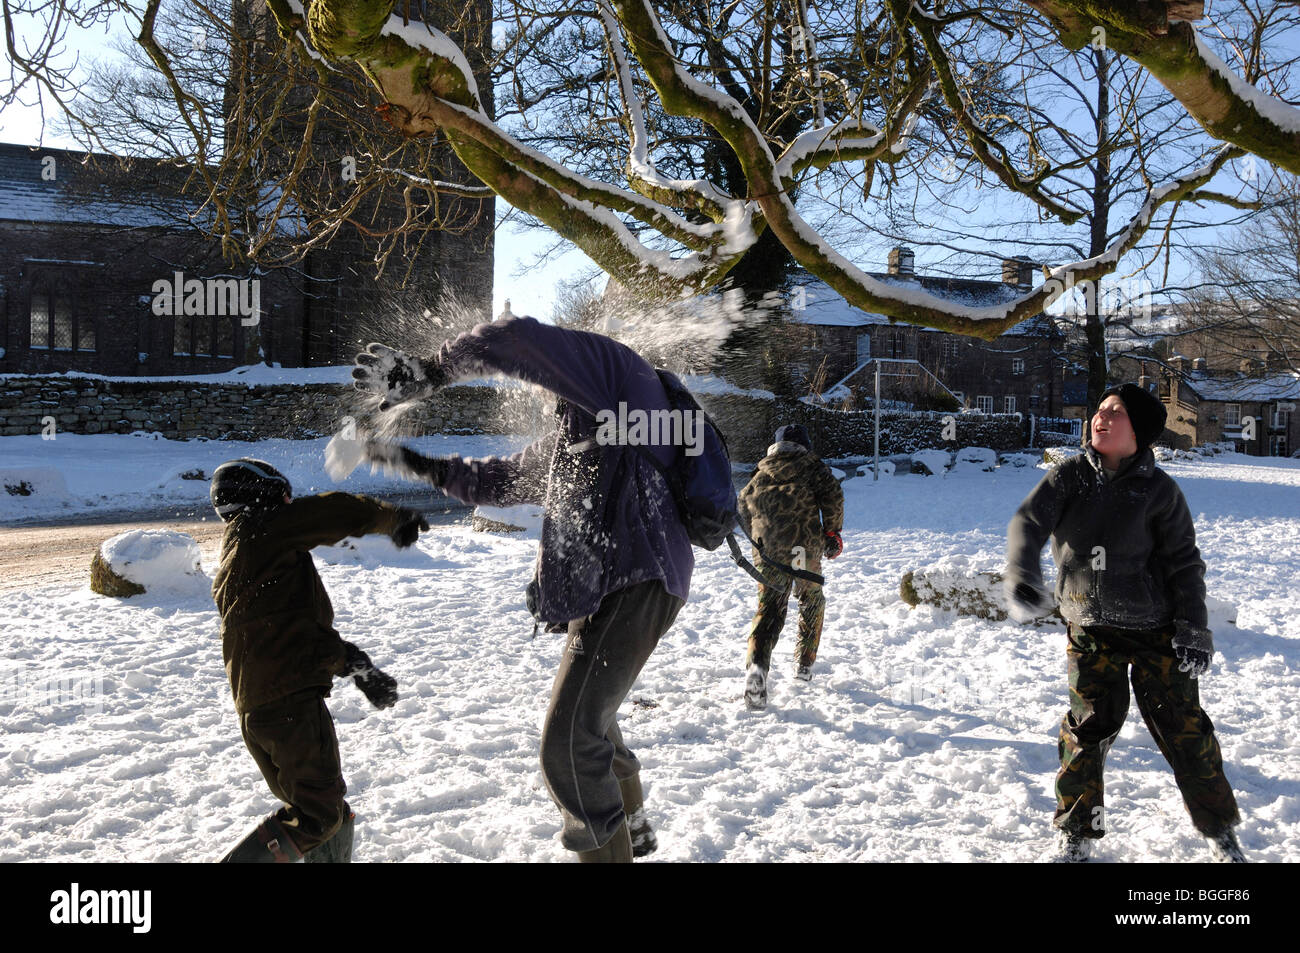 Children and adult having a snowball fight in the village of Widecome in the Moor Devon England Stock Photo